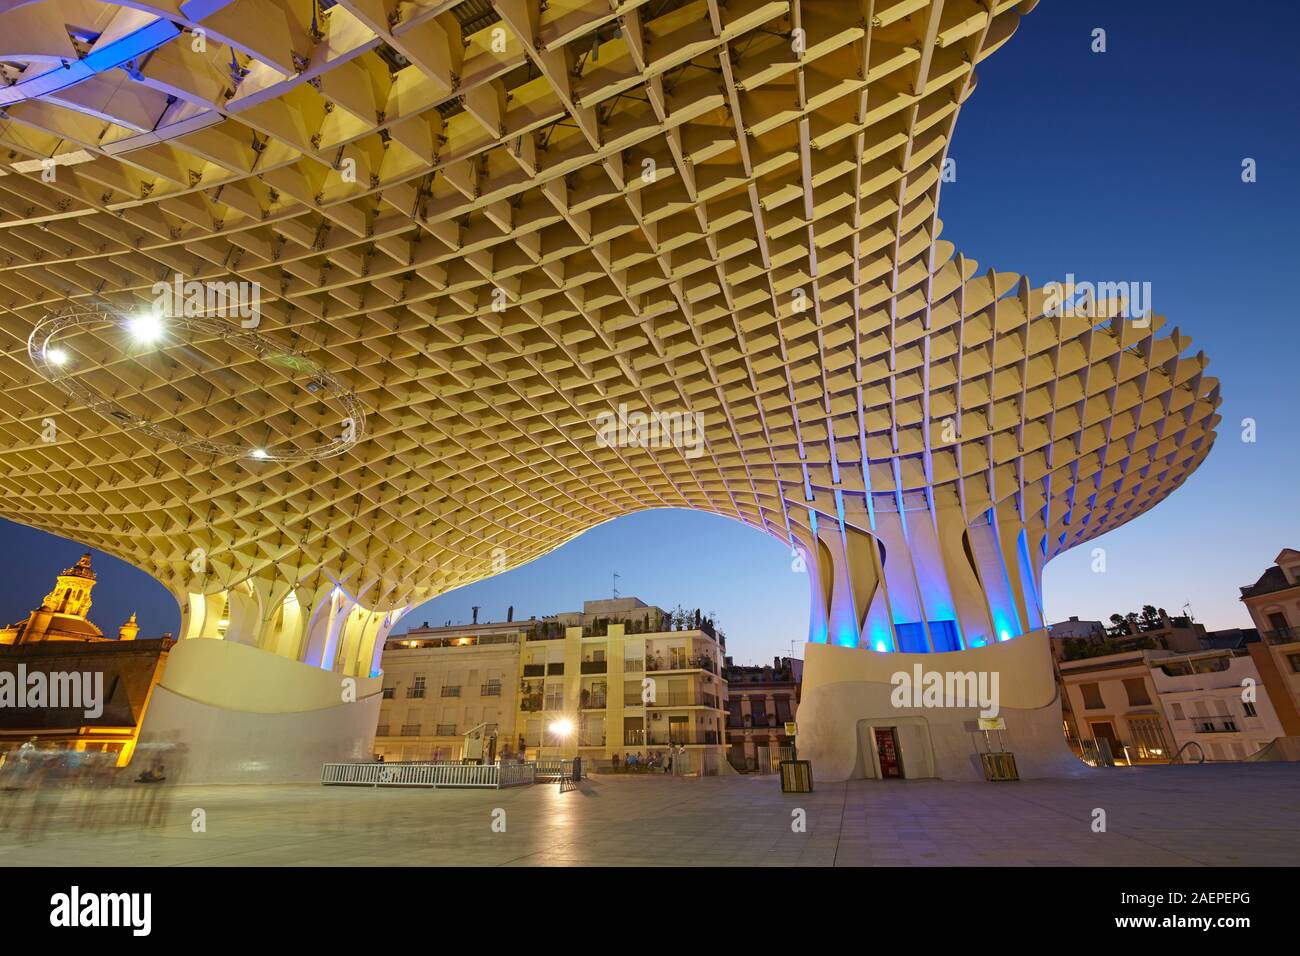 The wooden structure of the Metropol Parasol in Seville, Spain Stock Photo